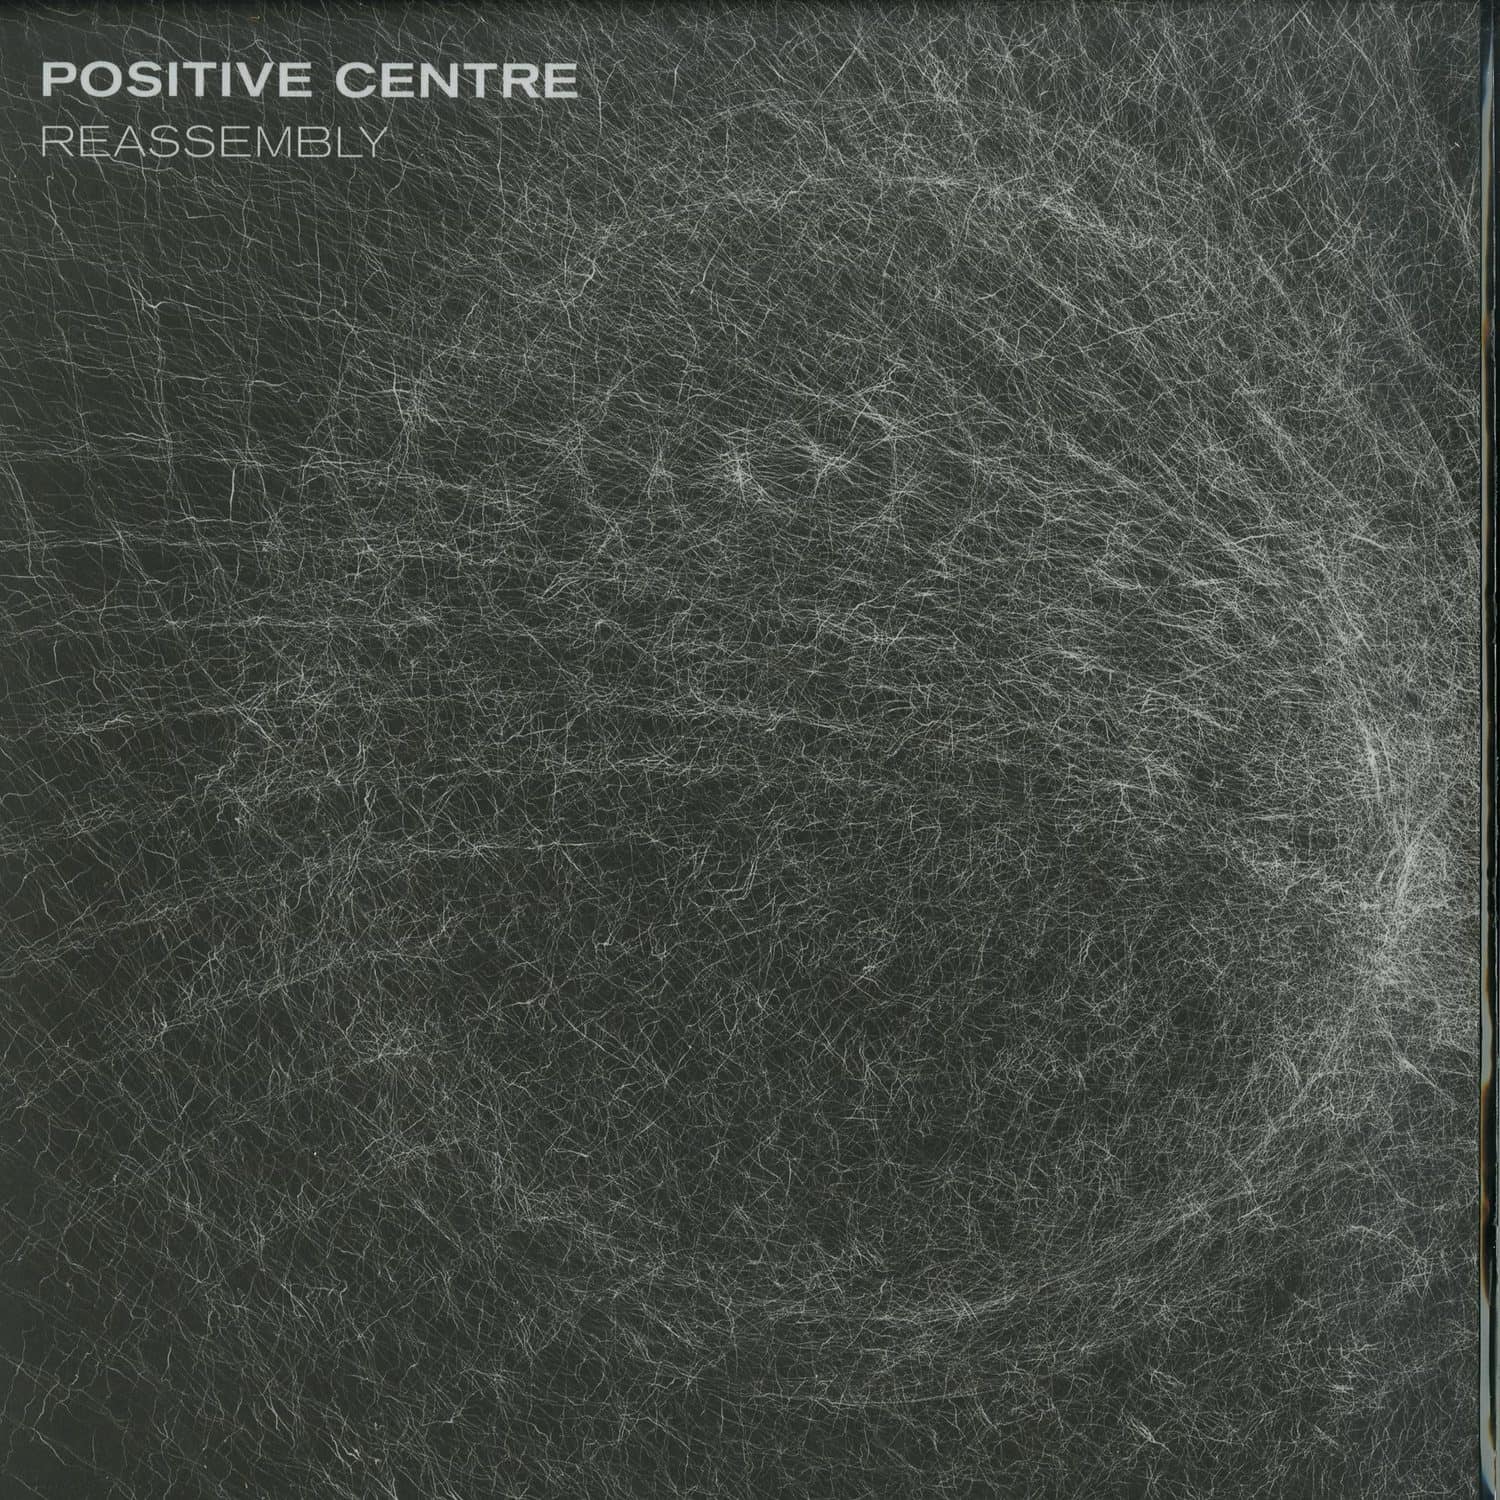 Positive Centre - REASSEMBLY 